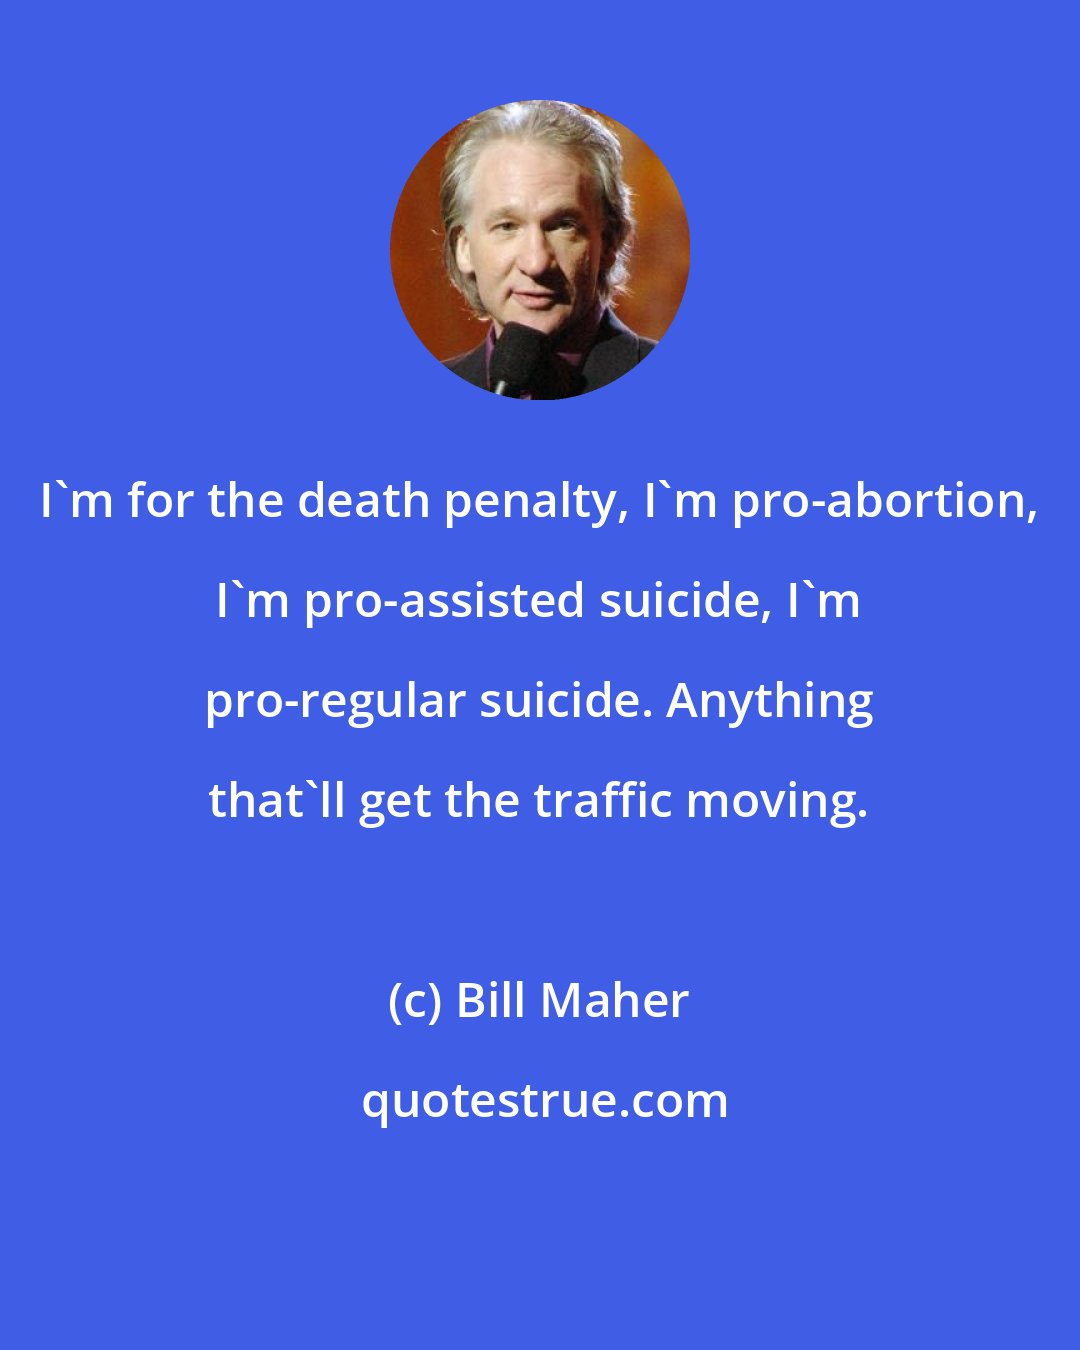 Bill Maher: I'm for the death penalty, I'm pro-abortion, I'm pro-assisted suicide, I'm pro-regular suicide. Anything that'll get the traffic moving.